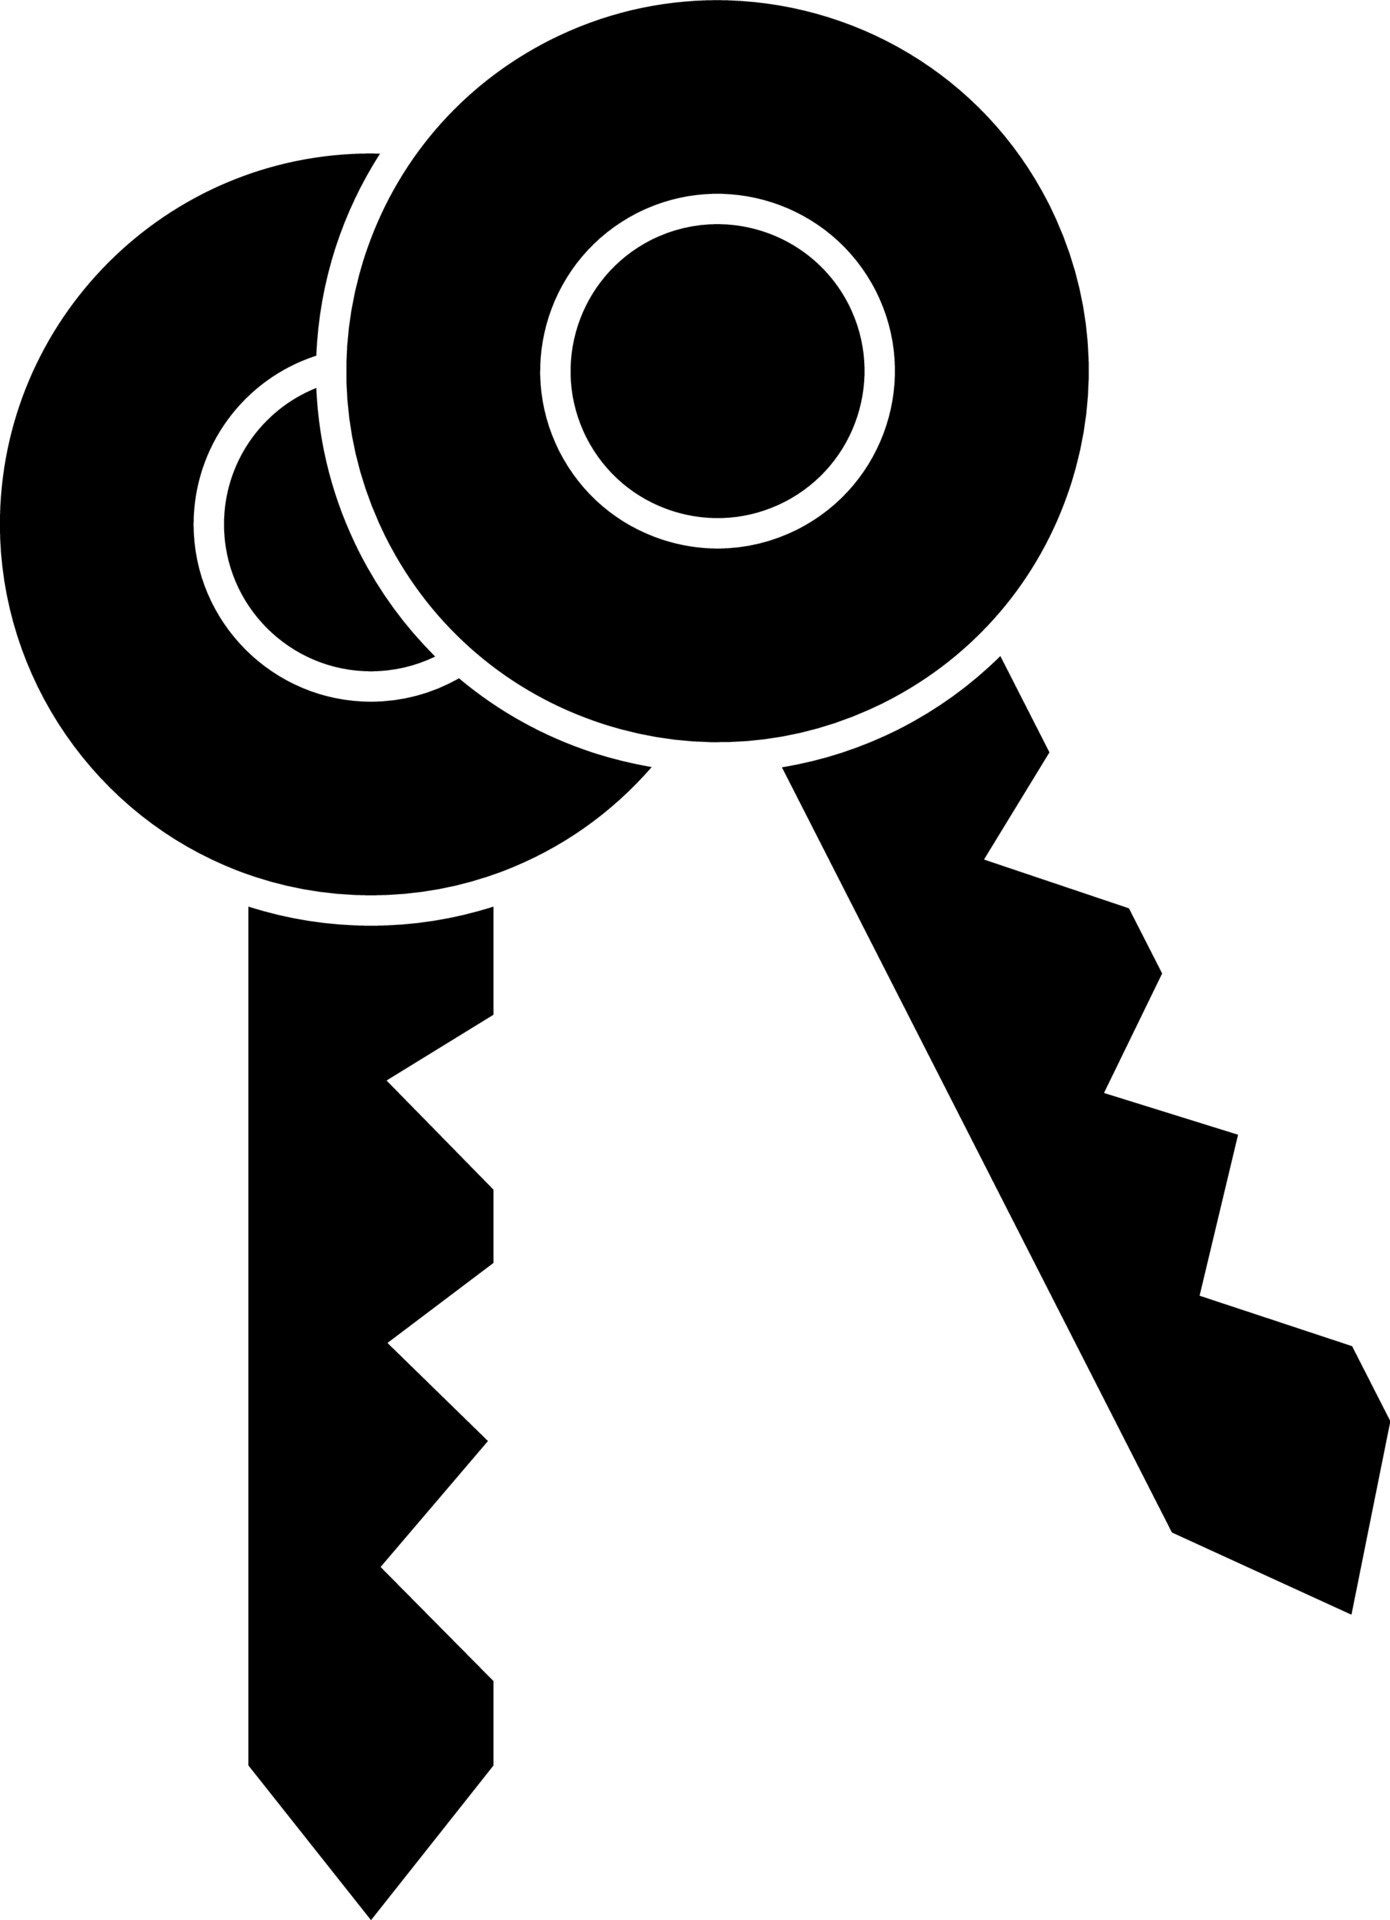 key pair icon or symbol in Black and White color. 24276144 Vector Art ...